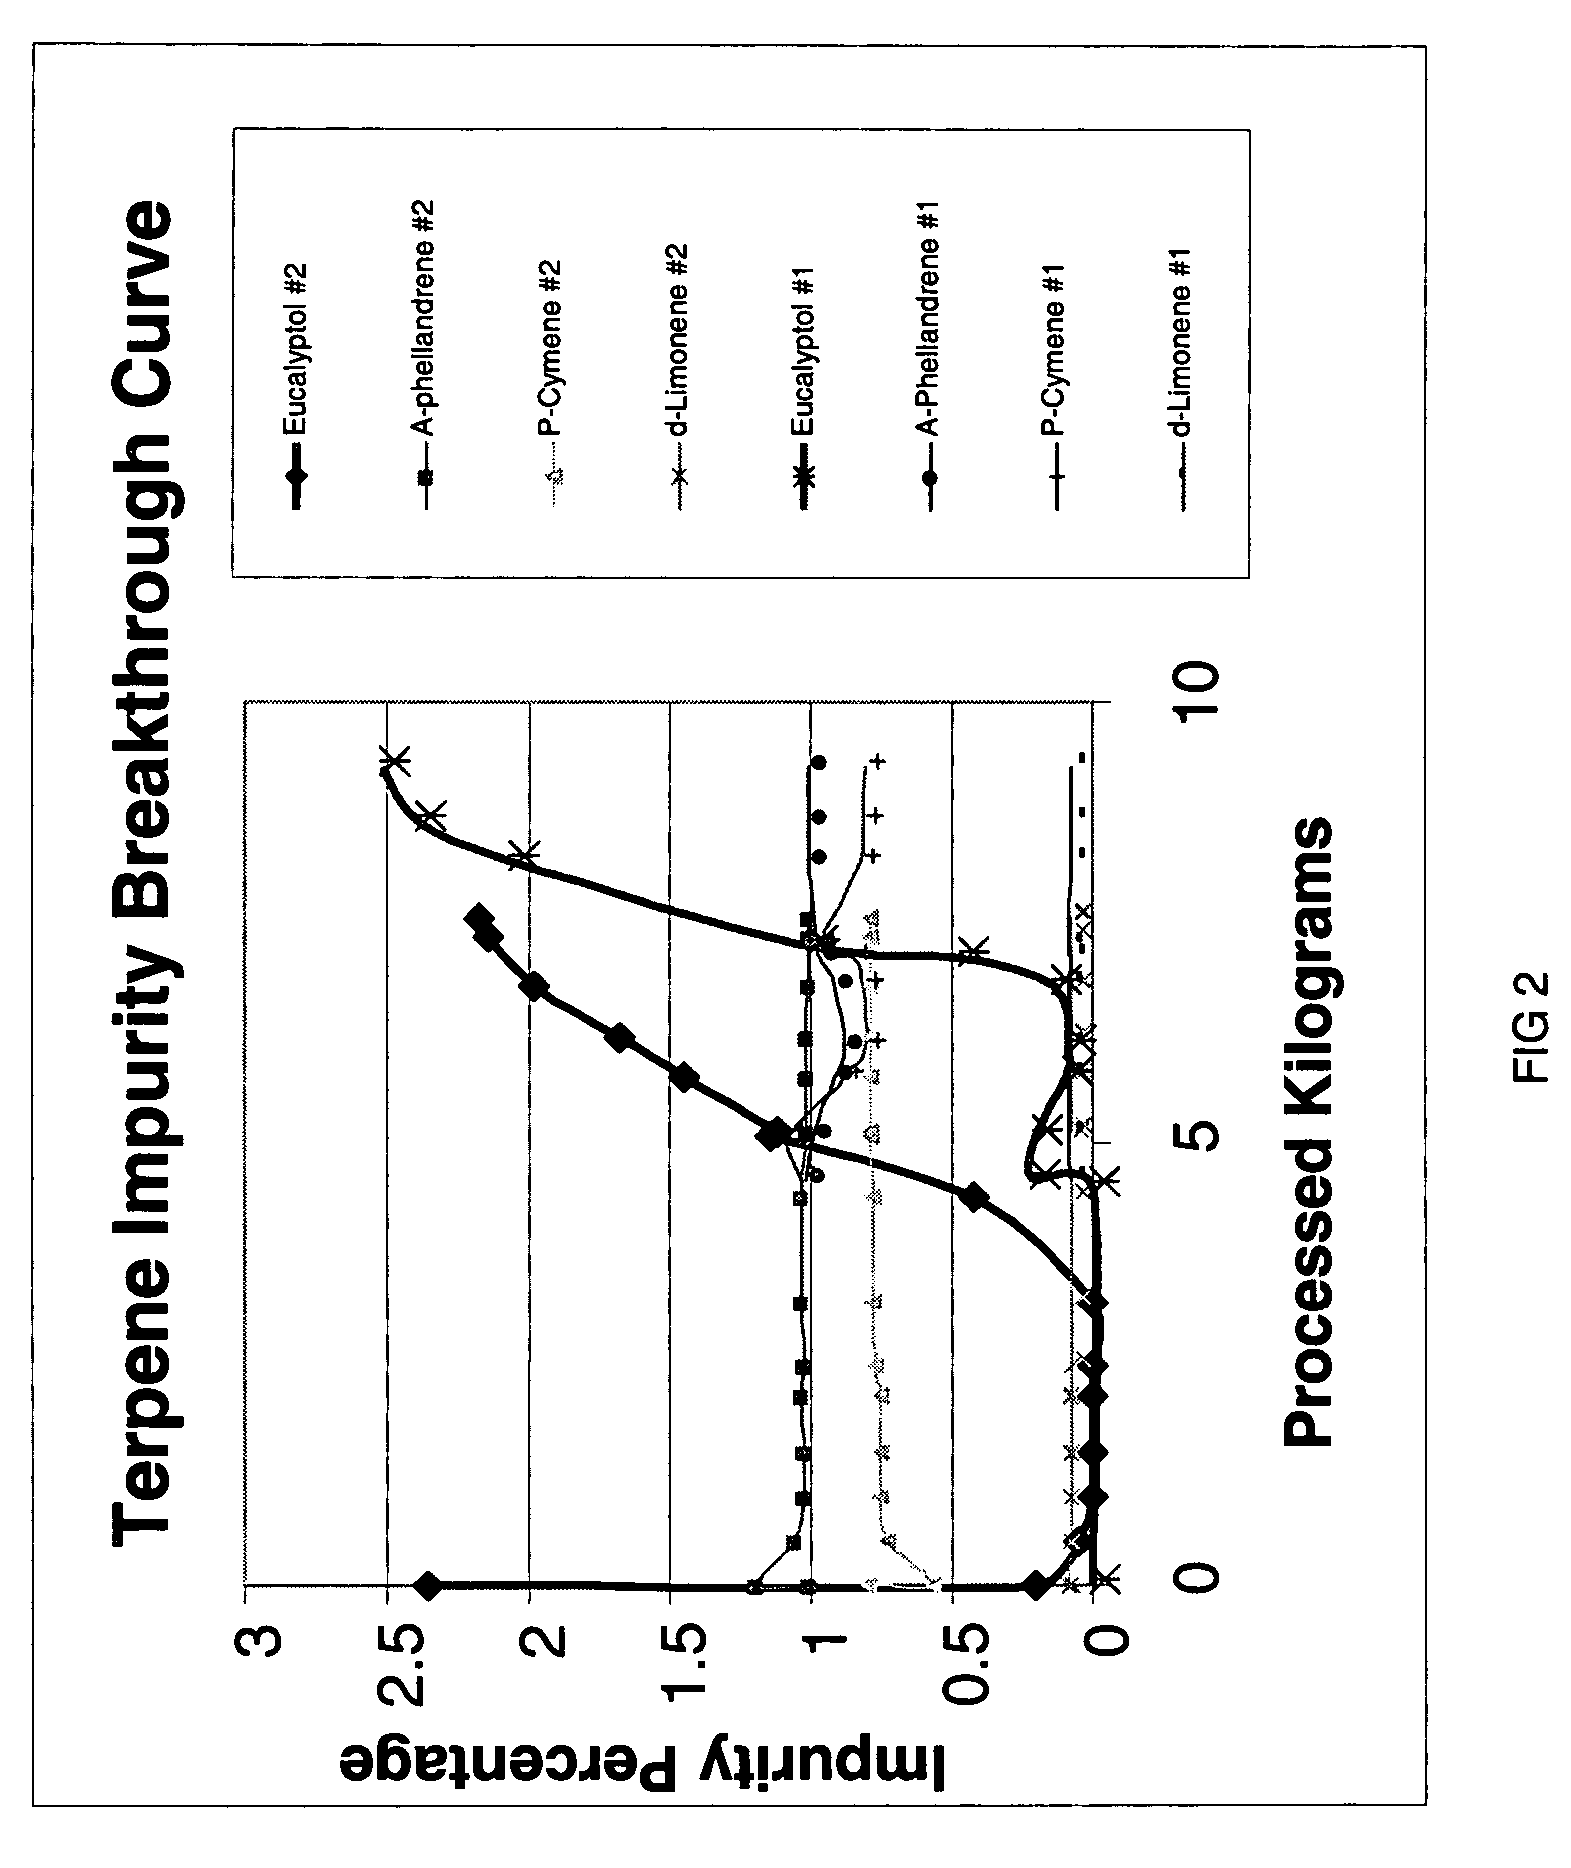 Selective purification of mono-terpenes for removal of oxygen containing species